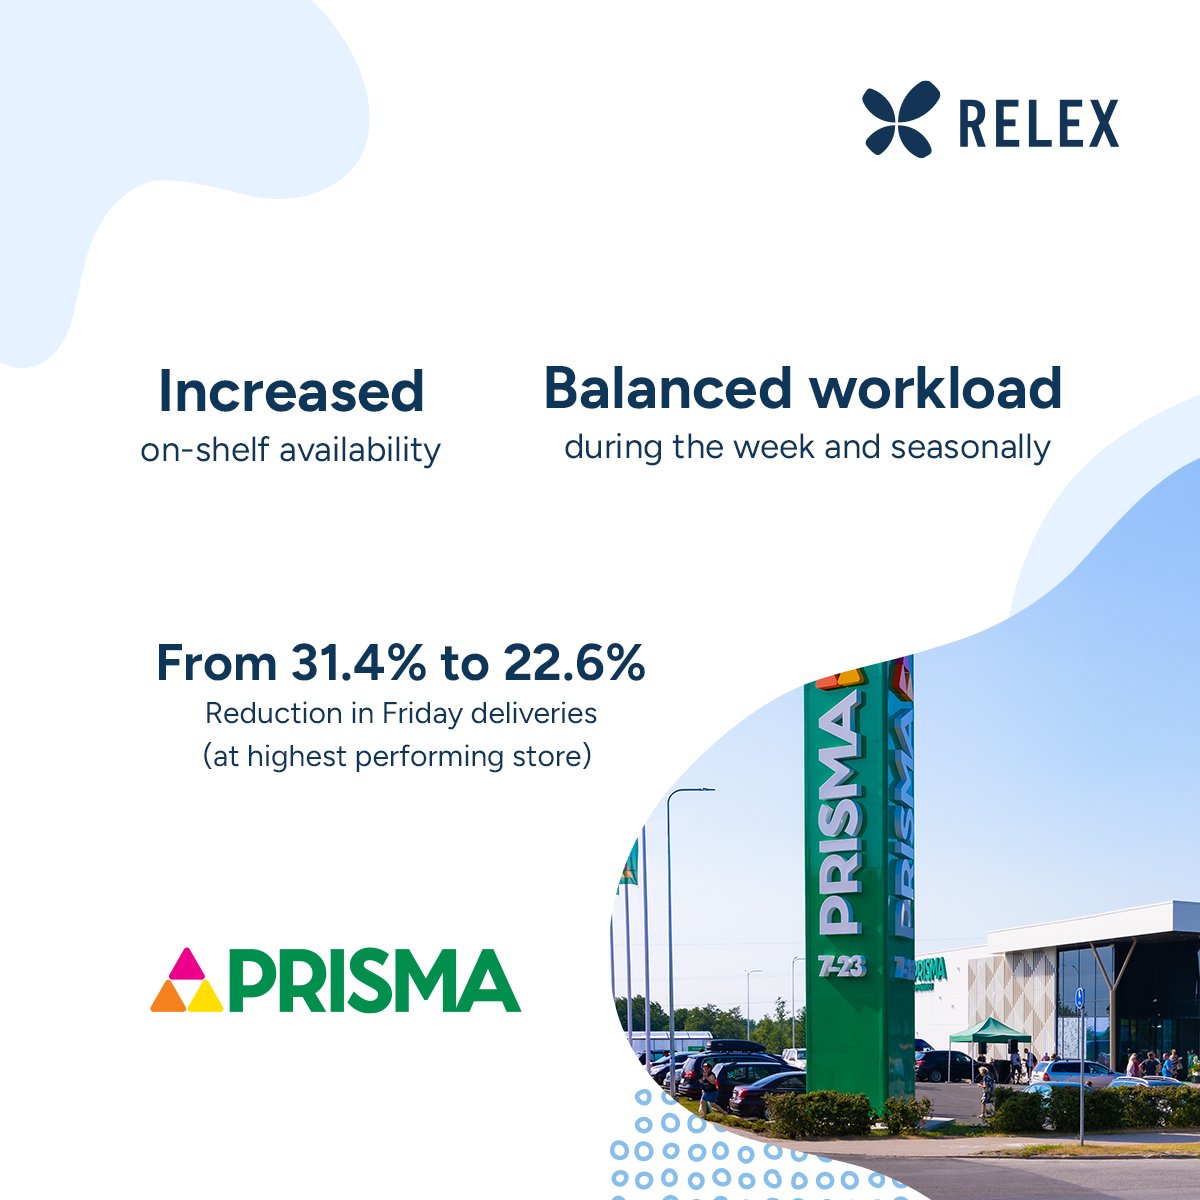 Prisma Peremarket, a leading Estonian grocery retailer, enhanced their operations with RELEX. By optimizing capacity, they smoothed delivery schedules and aligned workforce efforts, leading to fewer delivery peaks and improved perishable management. relexsolutions.com/resources/case…